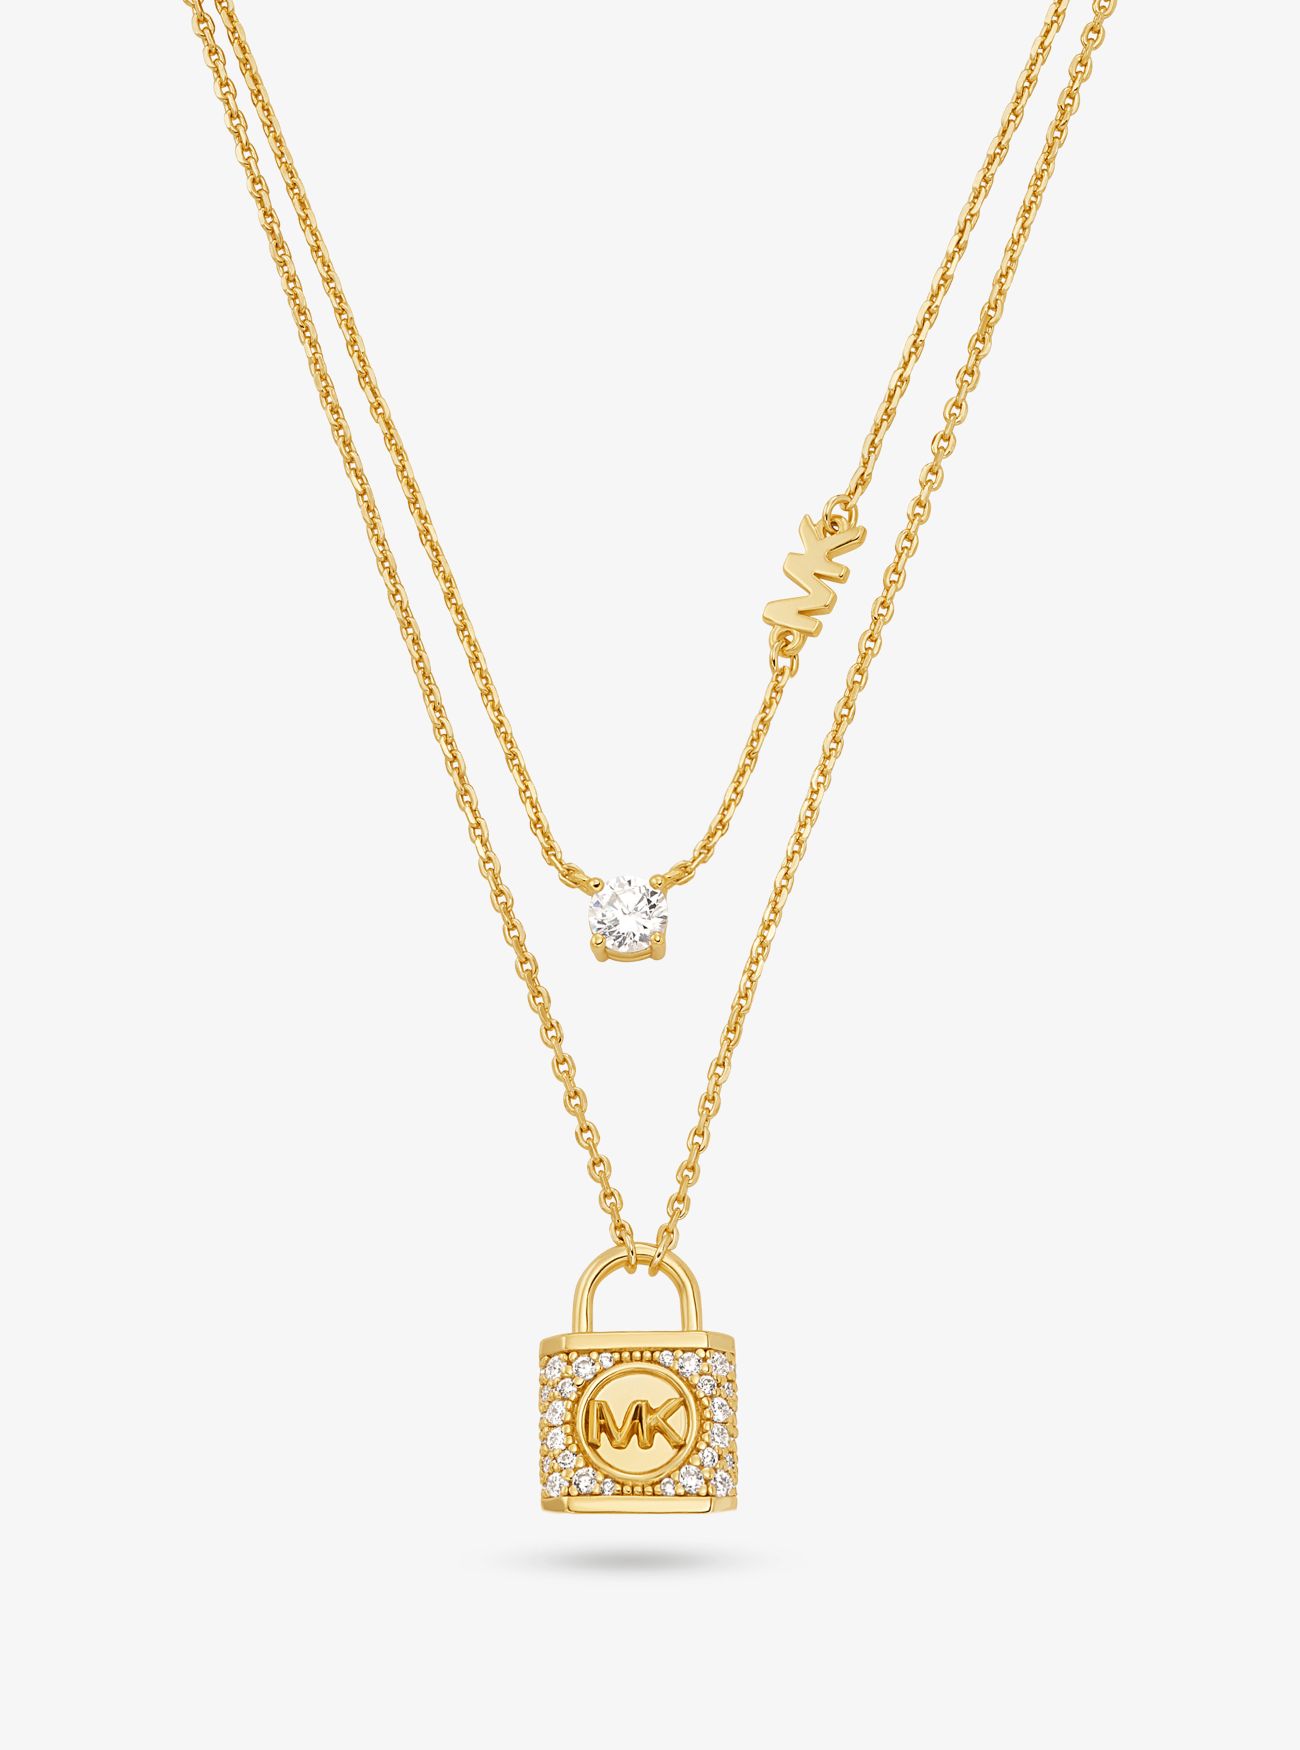 MK Precious Metal-Plated Sterling Silver Pavé Lock Layered Necklace - Gold - Michael Kors